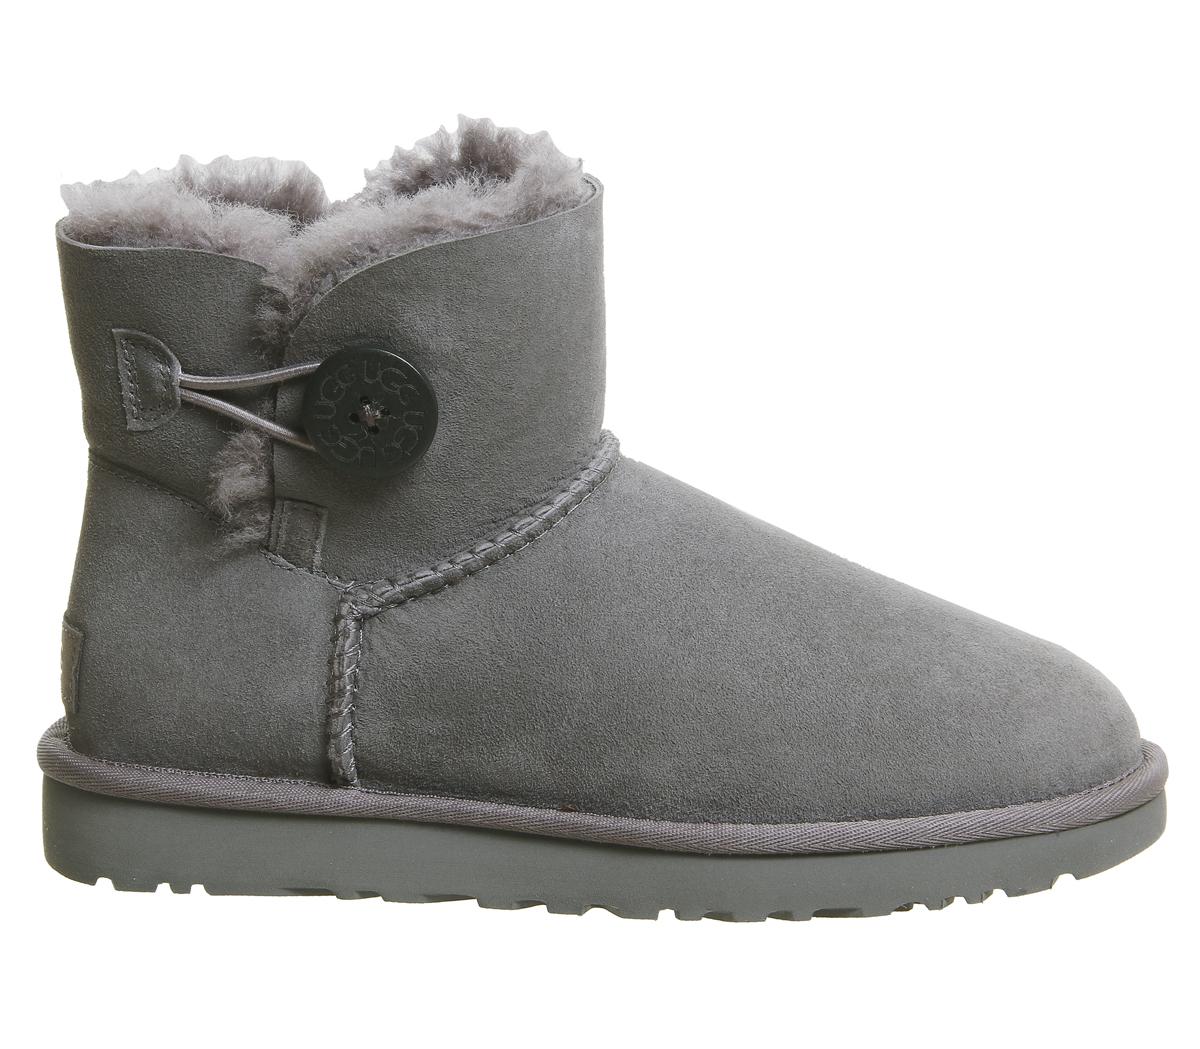 Ugg Mini Bailey Button Ii Boots Grey Suede Ankle Boots